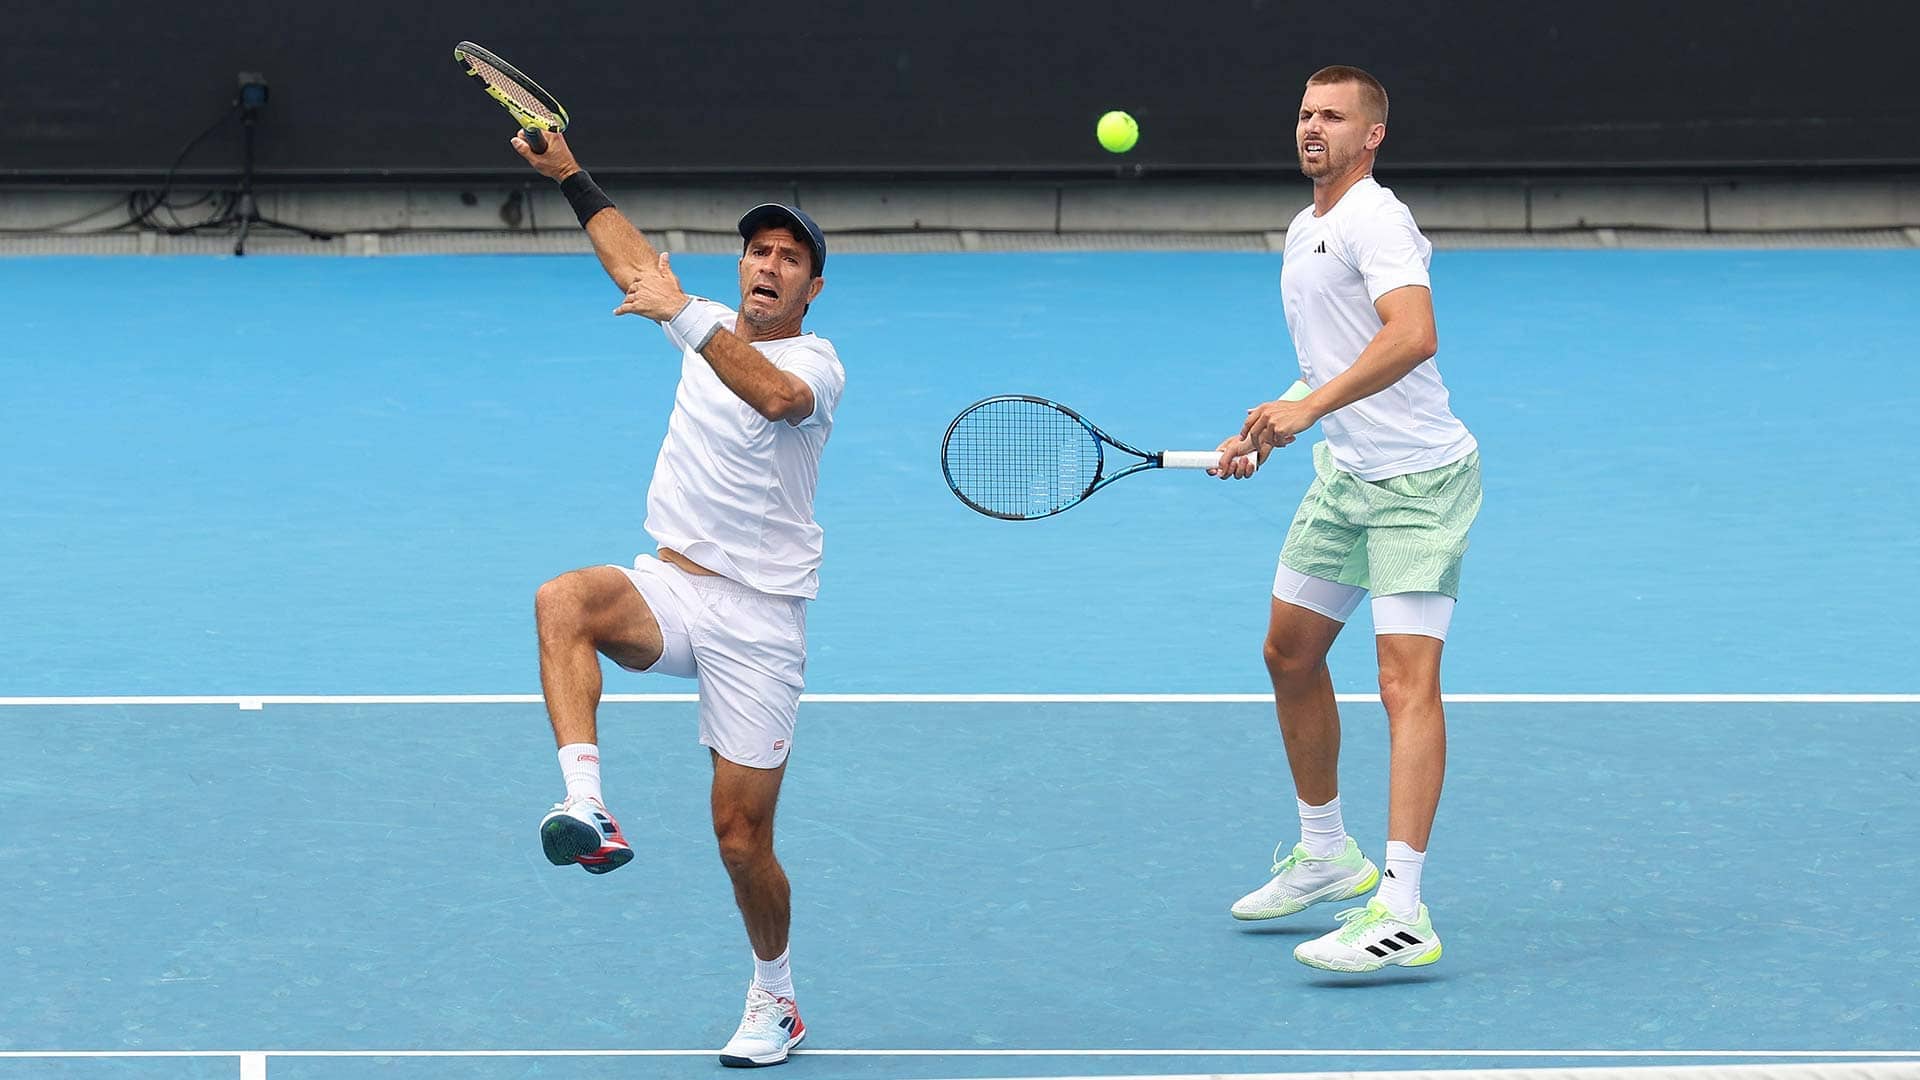 Jean-Julien Rojer and Lloyd Glasspool in action on Saturday in Melbourne.